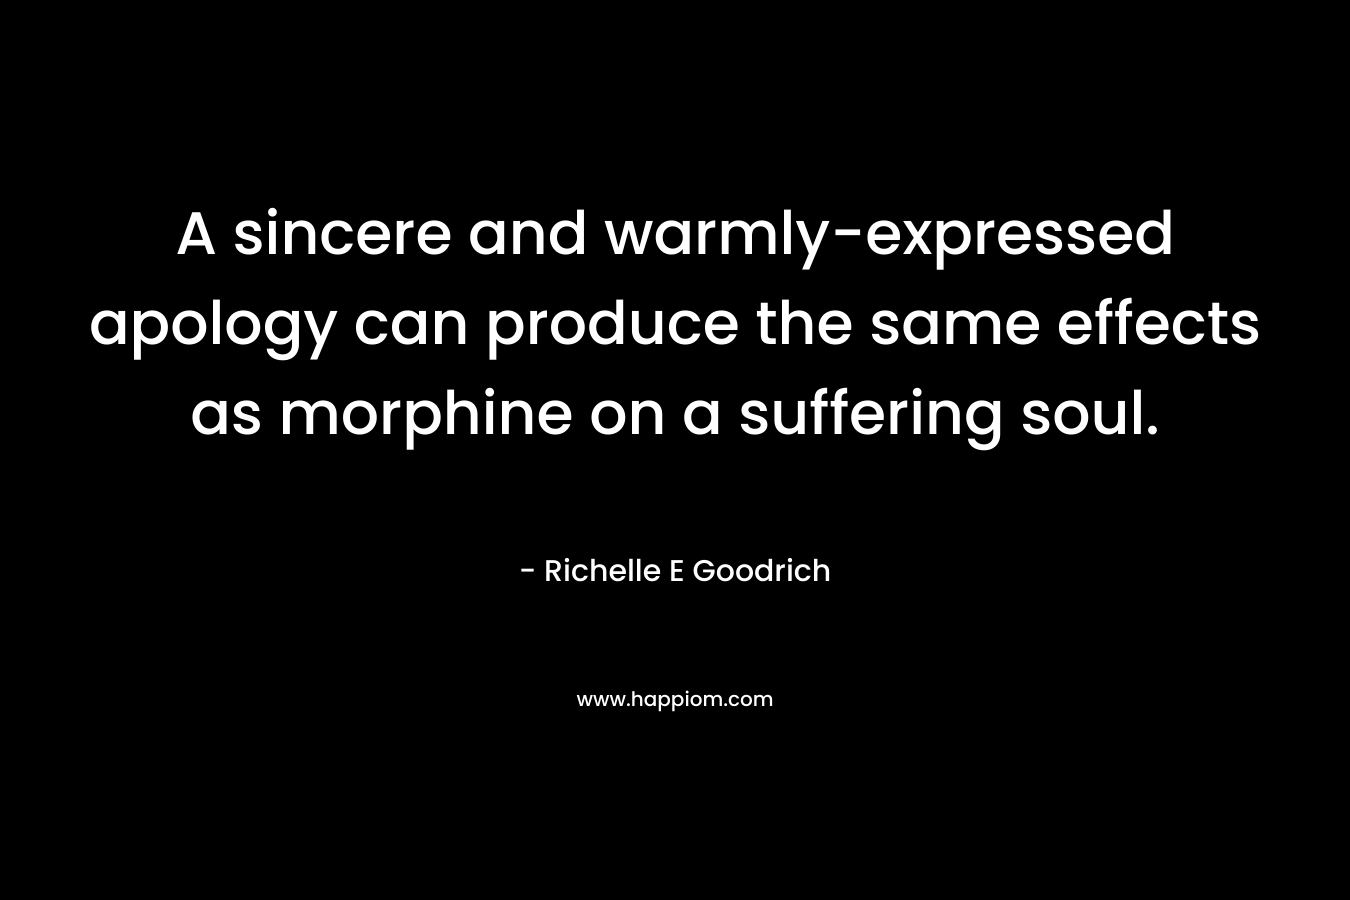 A sincere and warmly-expressed apology can produce the same effects as morphine on a suffering soul. – Richelle E Goodrich